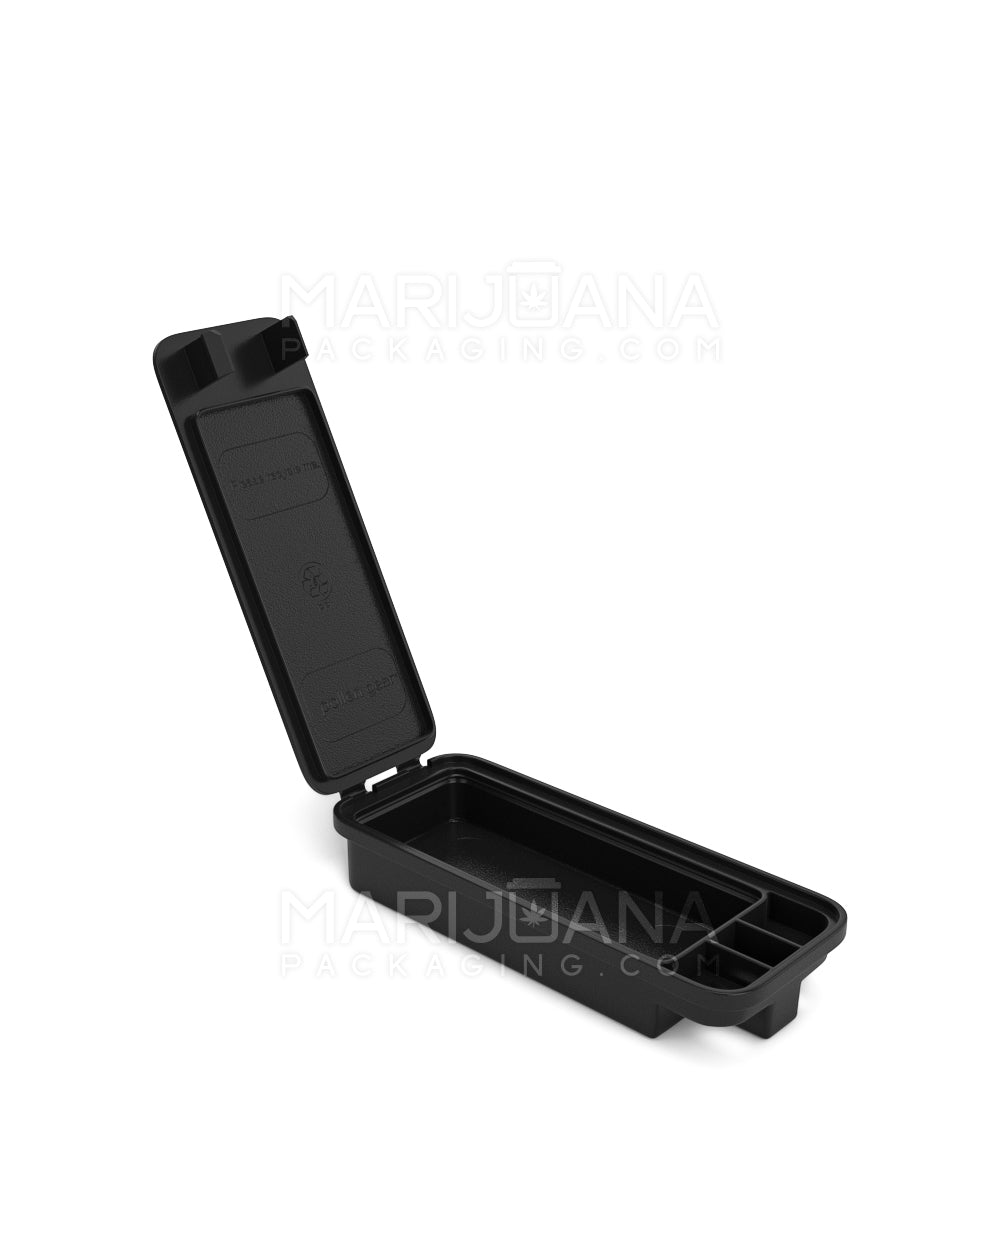 Child Resistant | Snap Box Edible & Pre-Roll Joint Case | Small - Black Plastic - 240 Count - 1